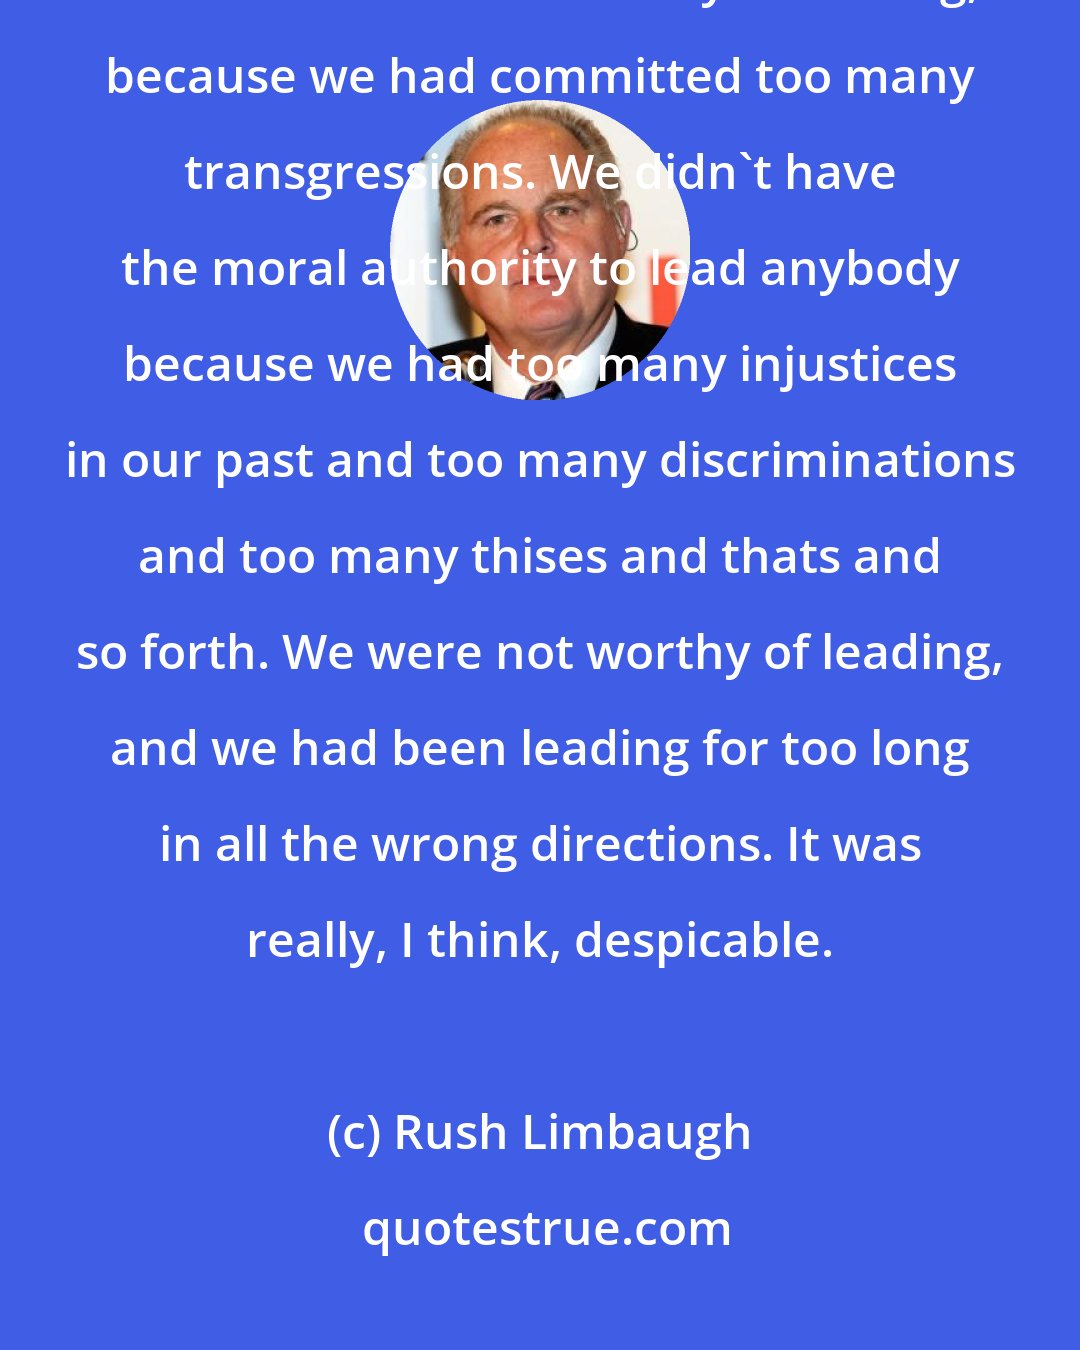 Rush Limbaugh: The American experiment, the United States in the past eight years [2008-2016] was not considered worthy of leading, because we had committed too many transgressions. We didn't have the moral authority to lead anybody because we had too many injustices in our past and too many discriminations and too many thises and thats and so forth. We were not worthy of leading, and we had been leading for too long in all the wrong directions. It was really, I think, despicable.